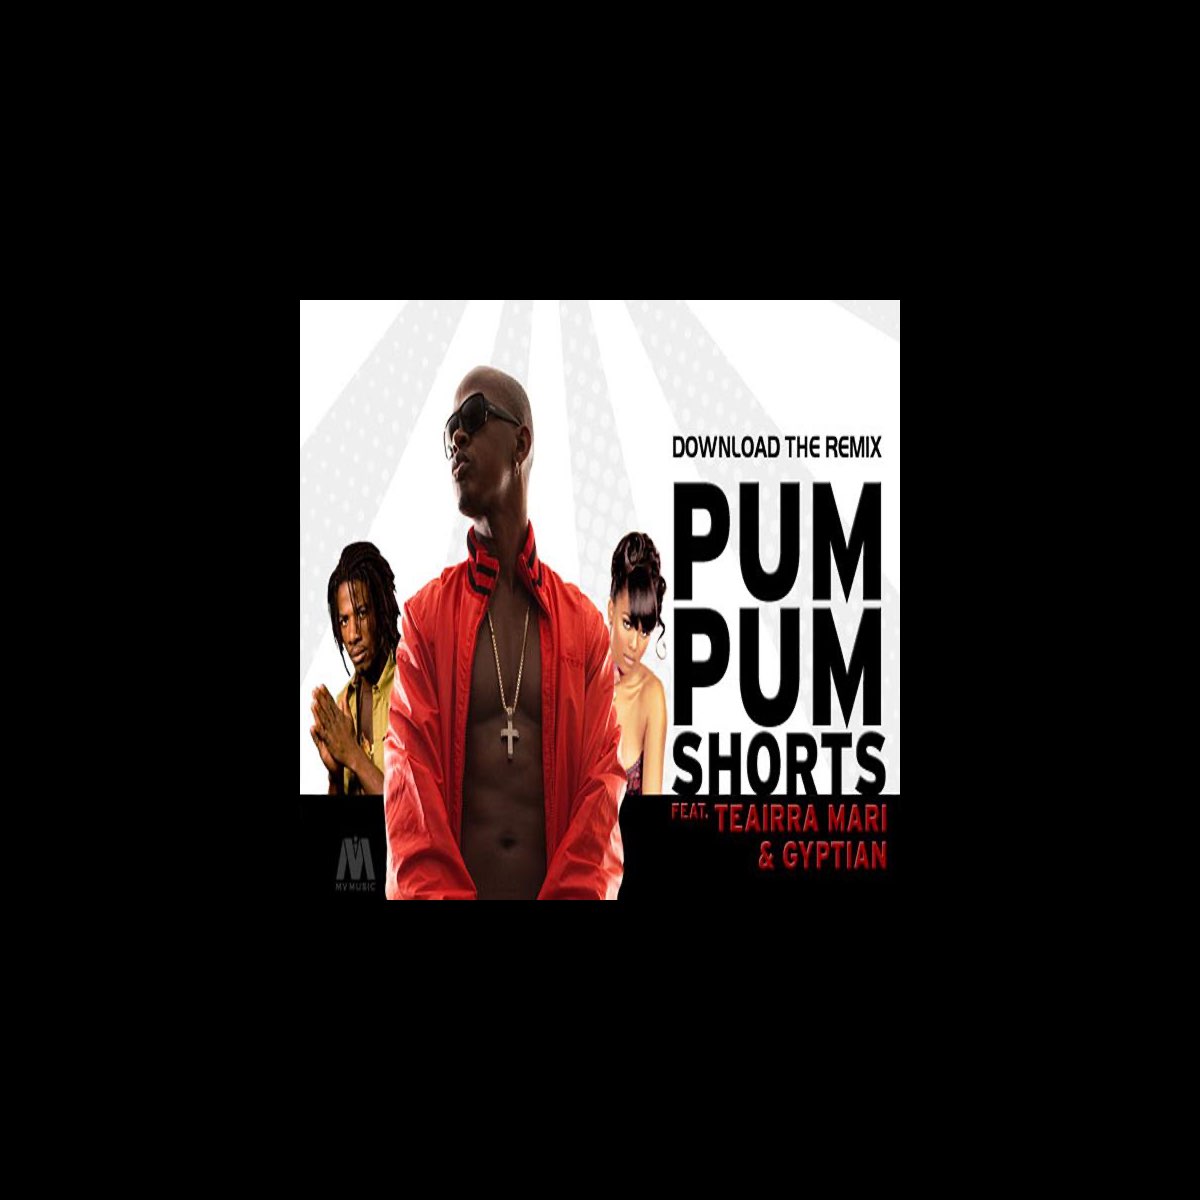 brittany dicks recommends Jamaican Pum Pum Shorts